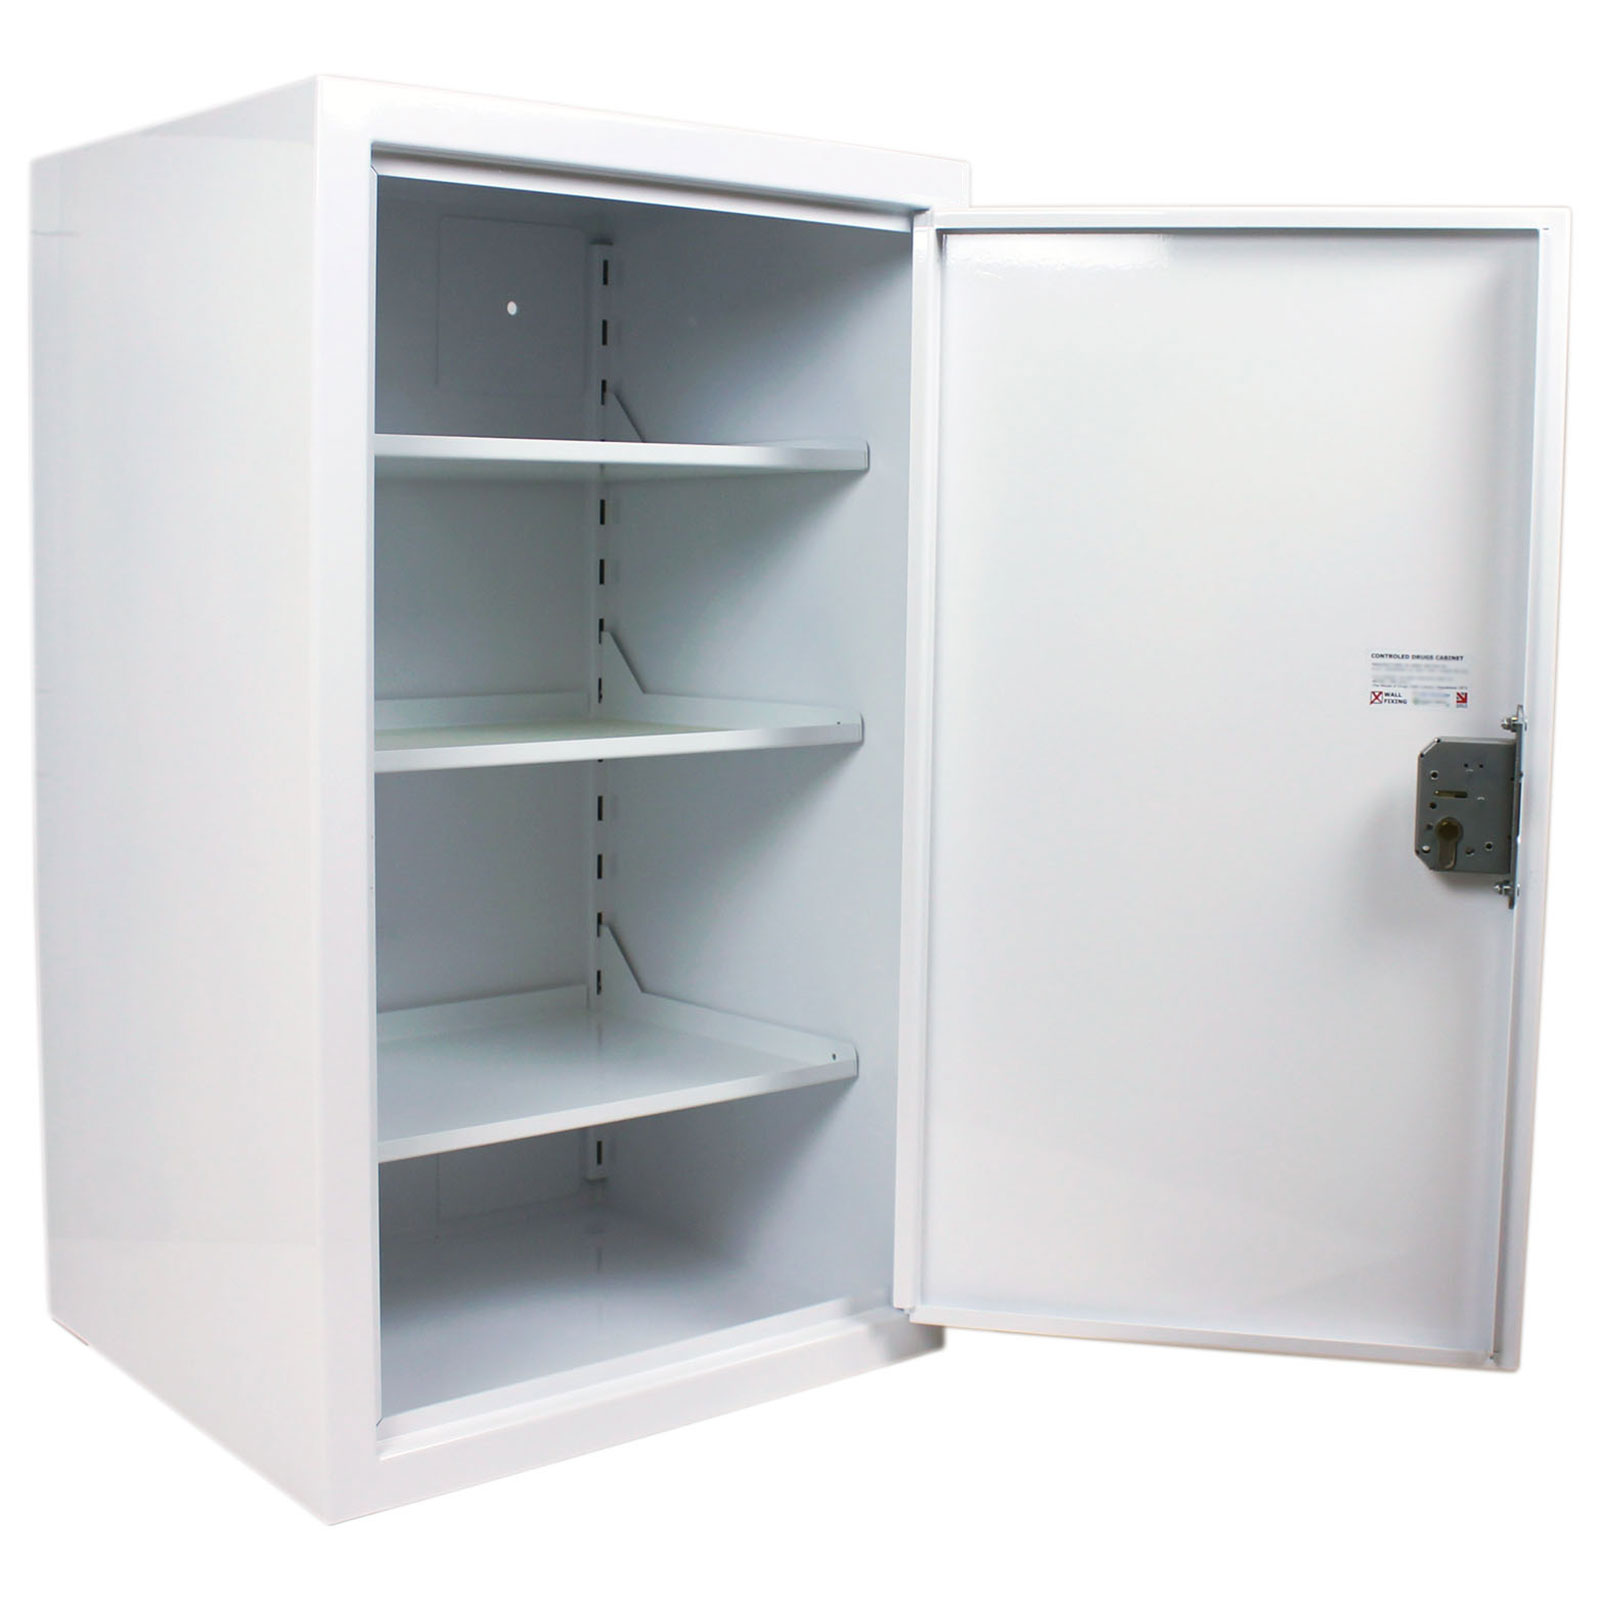 FPD 12149 Controlled Drugs Cabinet 191 Litre With door open